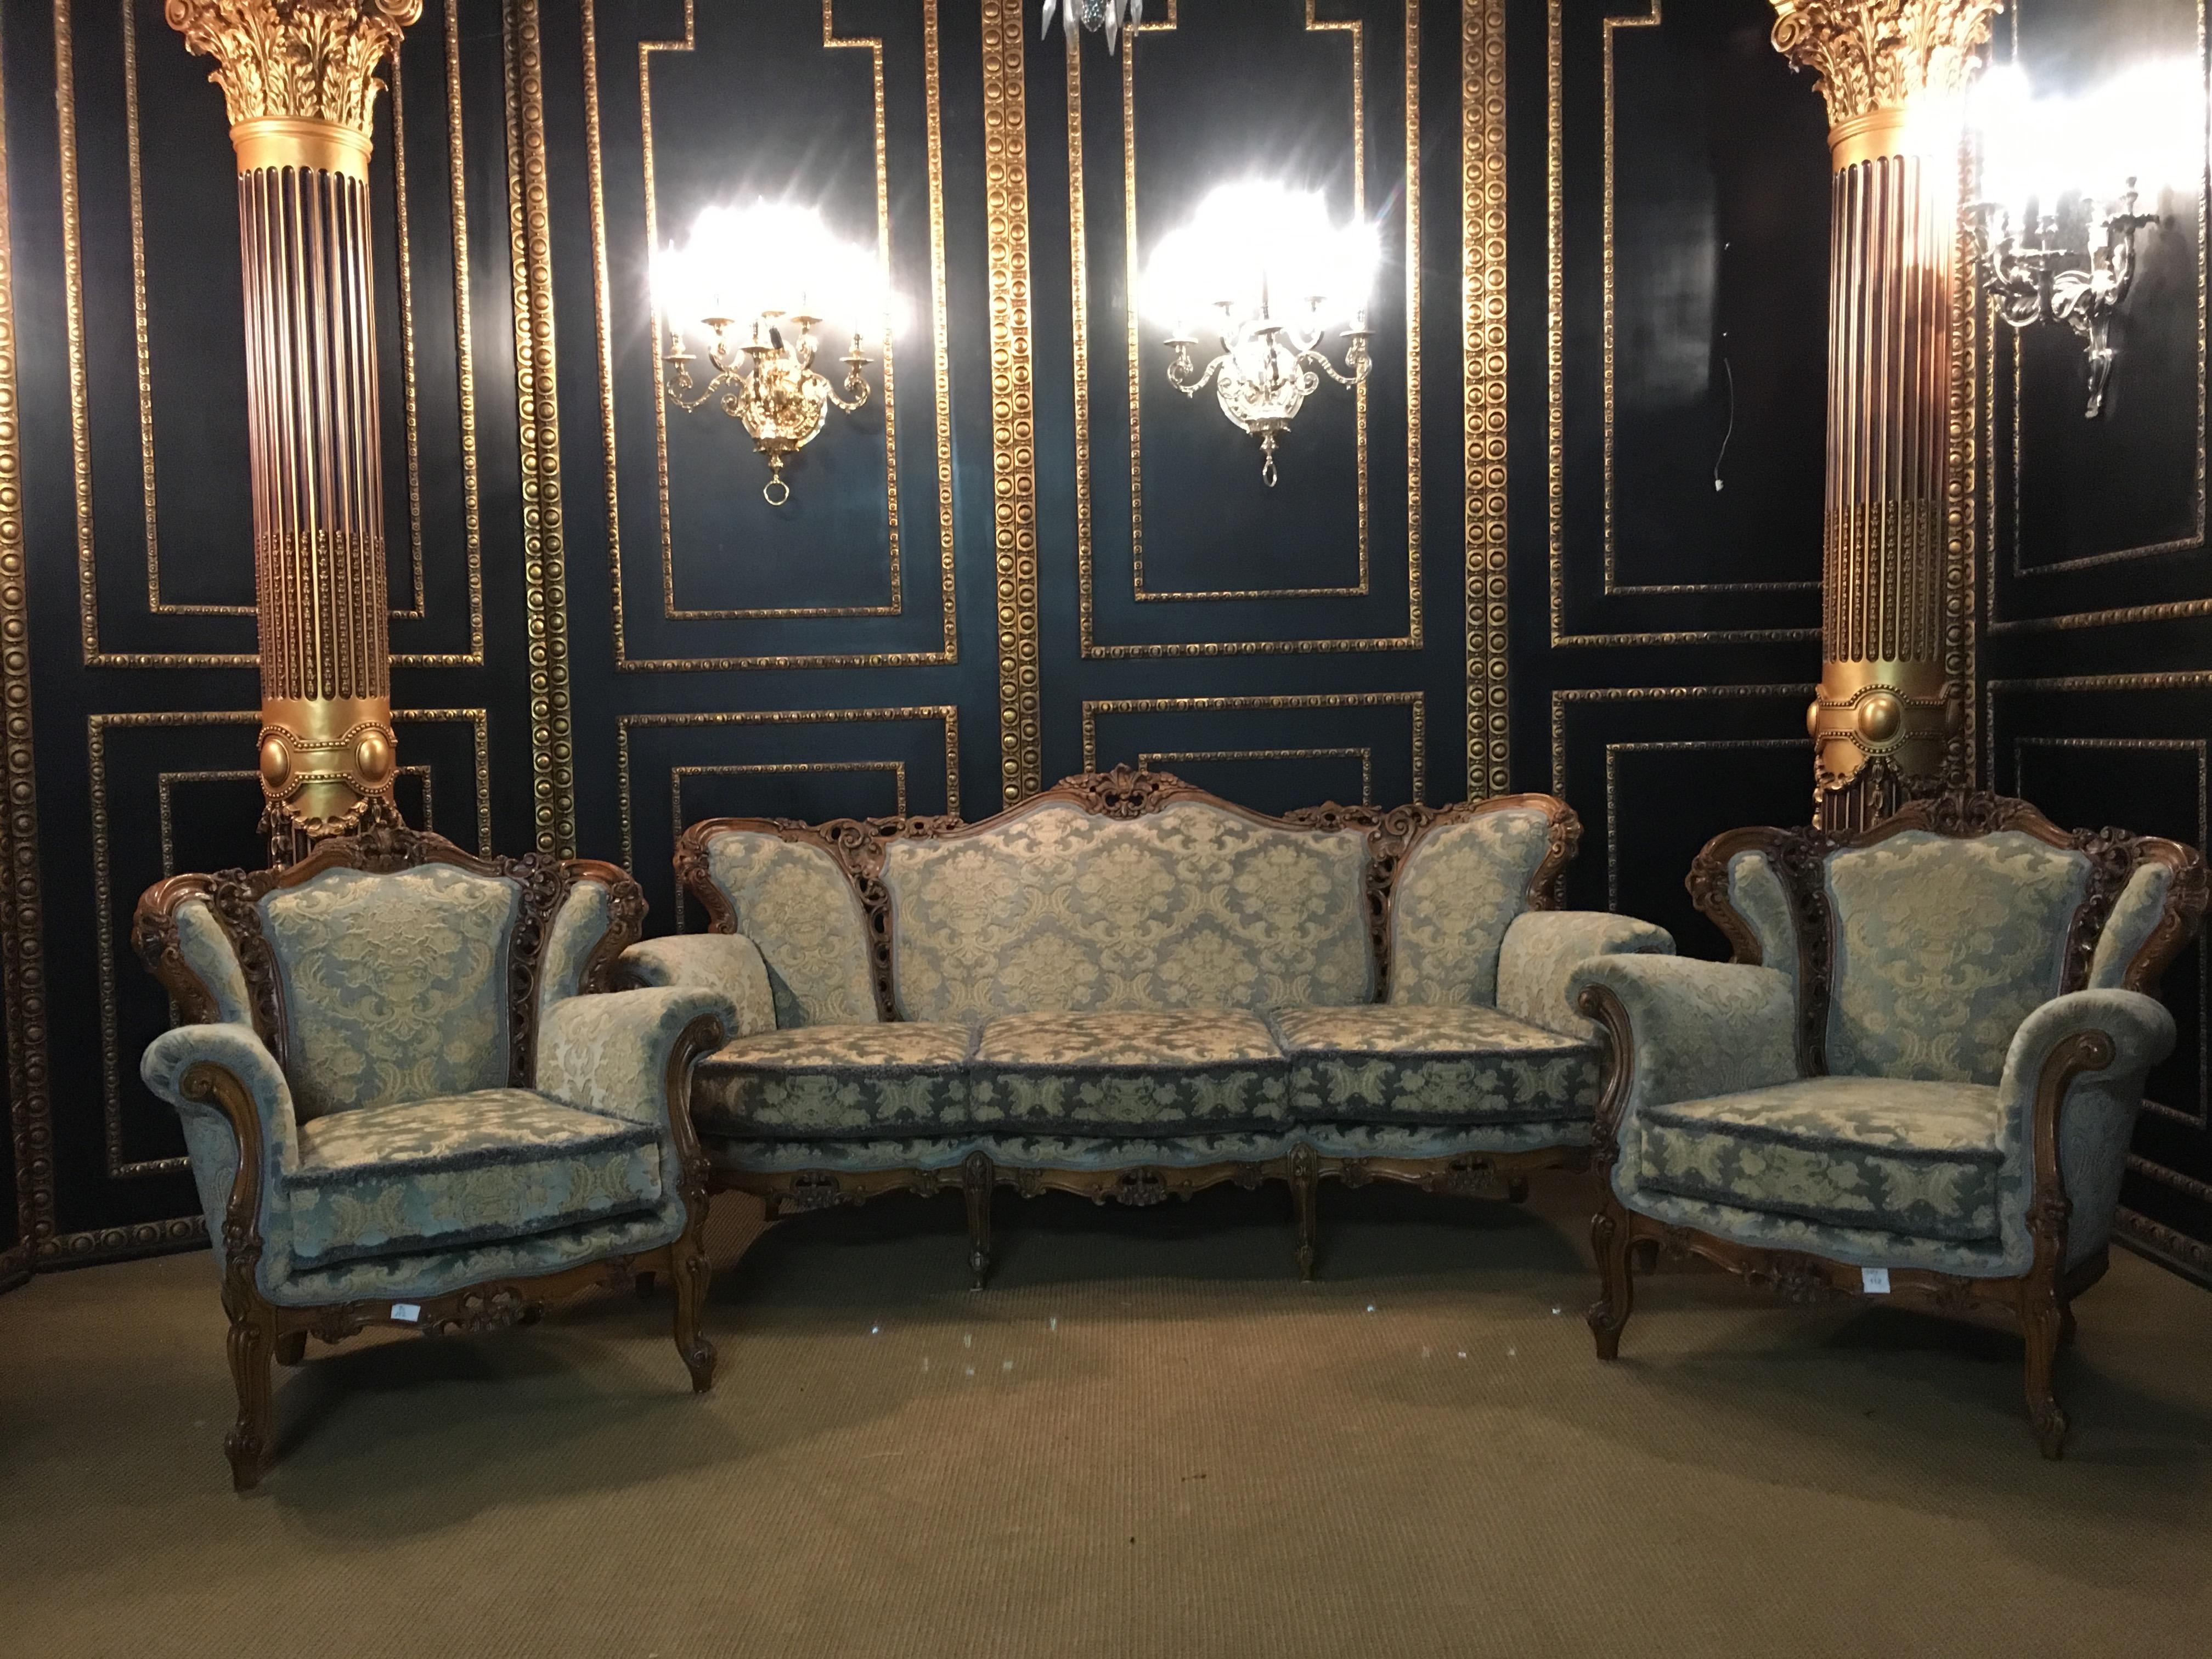 We present you a noble Italian couch set in Baroque style. The furnishings include a three-seater sofa and two armchairs. The processed wood brings the Baroque style to commendable. The carvings include entwined leafy tendrils and flowers. The